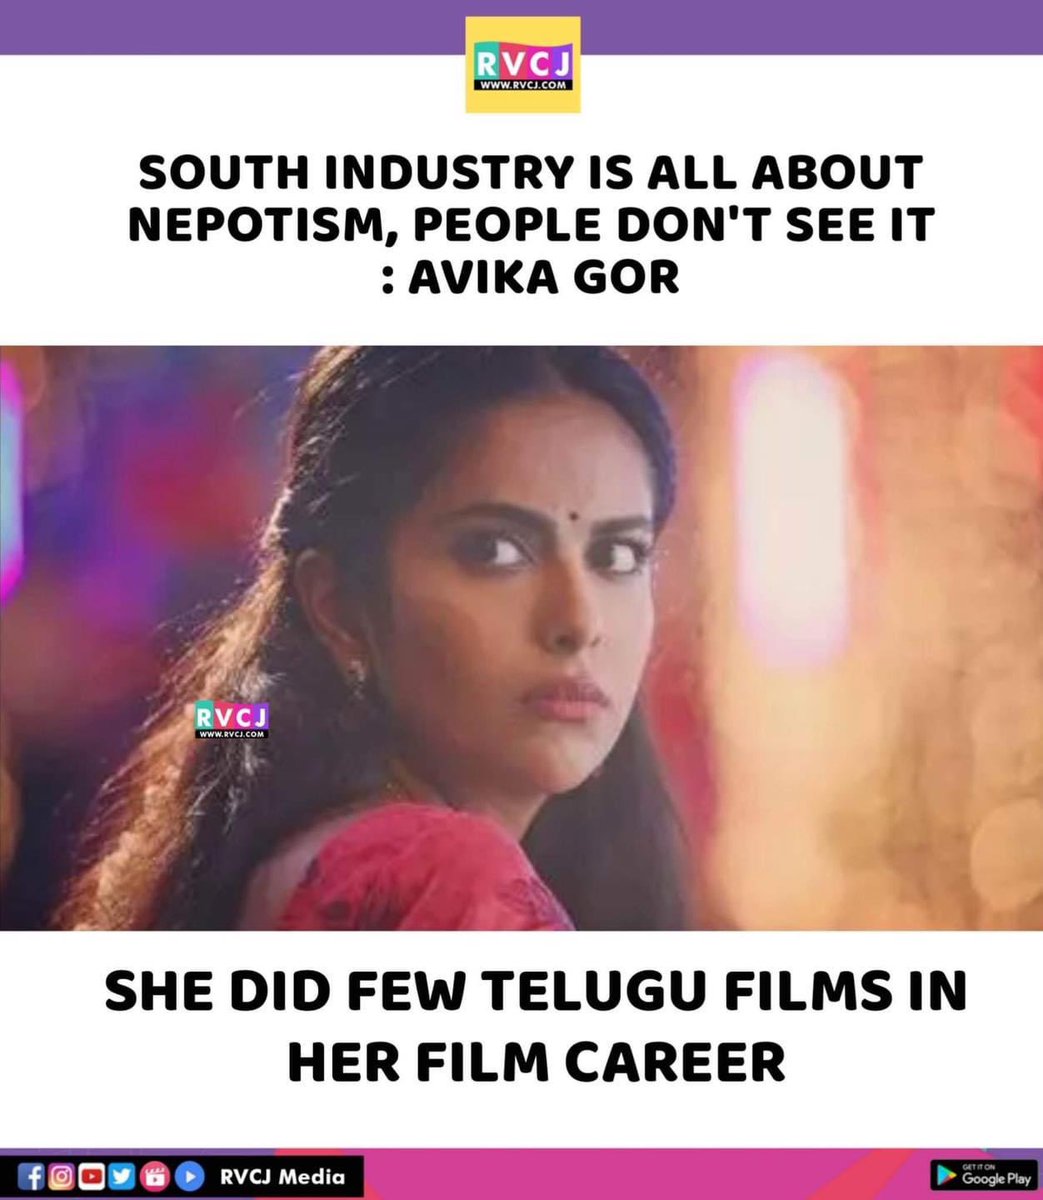 As heroin made her debut in tollywood n now criticising the same industry along with south cinema.. After doing 7-8 films now speaking this... #southindiancinema #Tollywood #tollymasti #tollywoodcinema